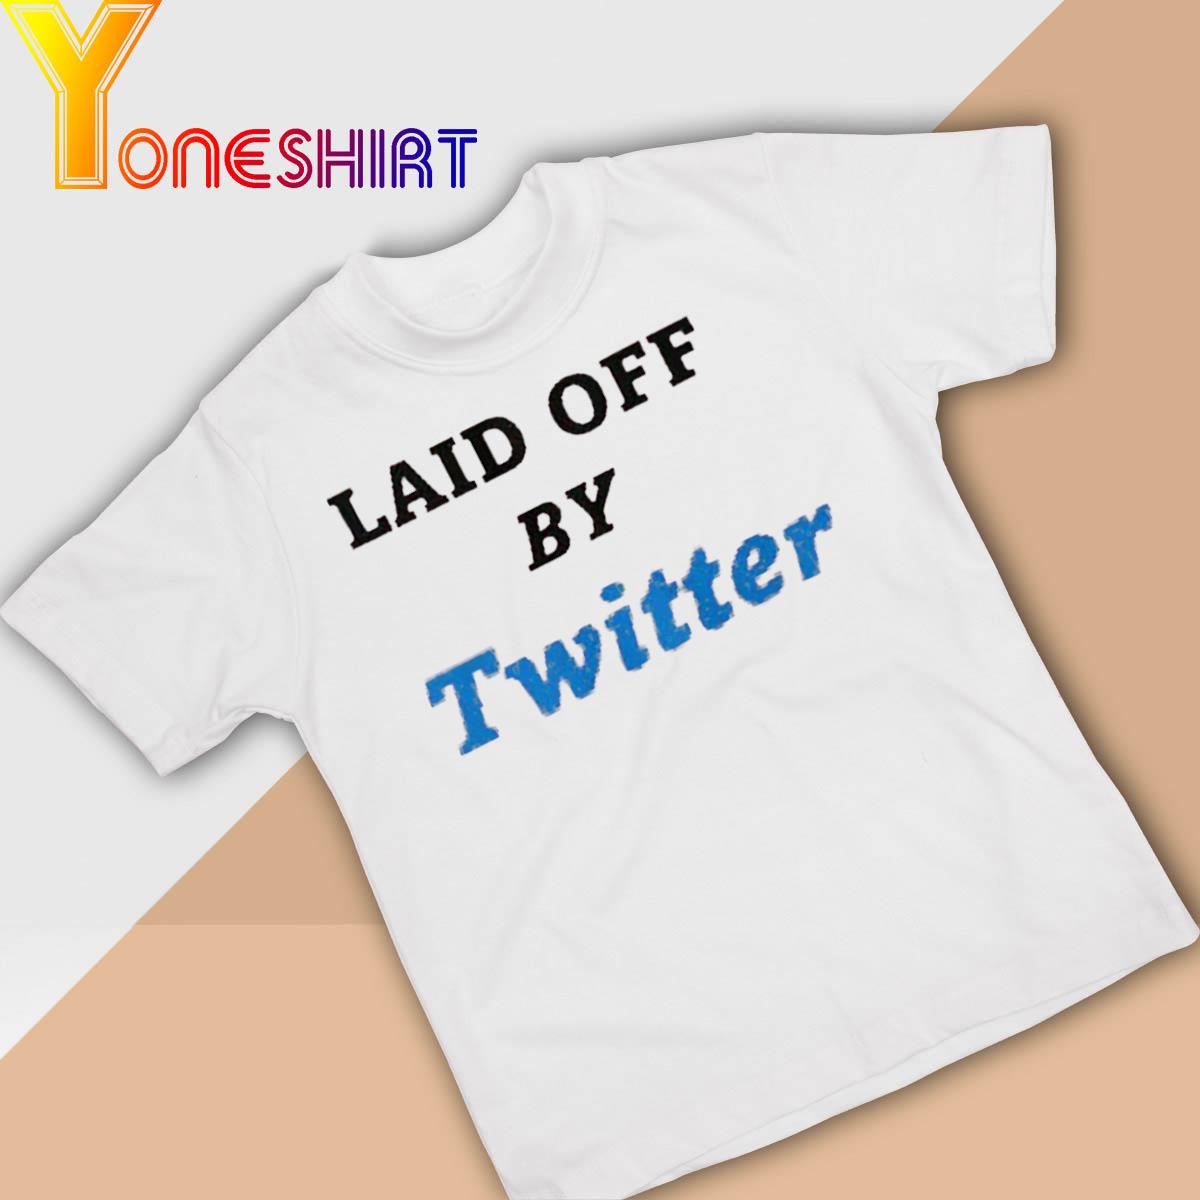 Laid Off by Twitter Shirt